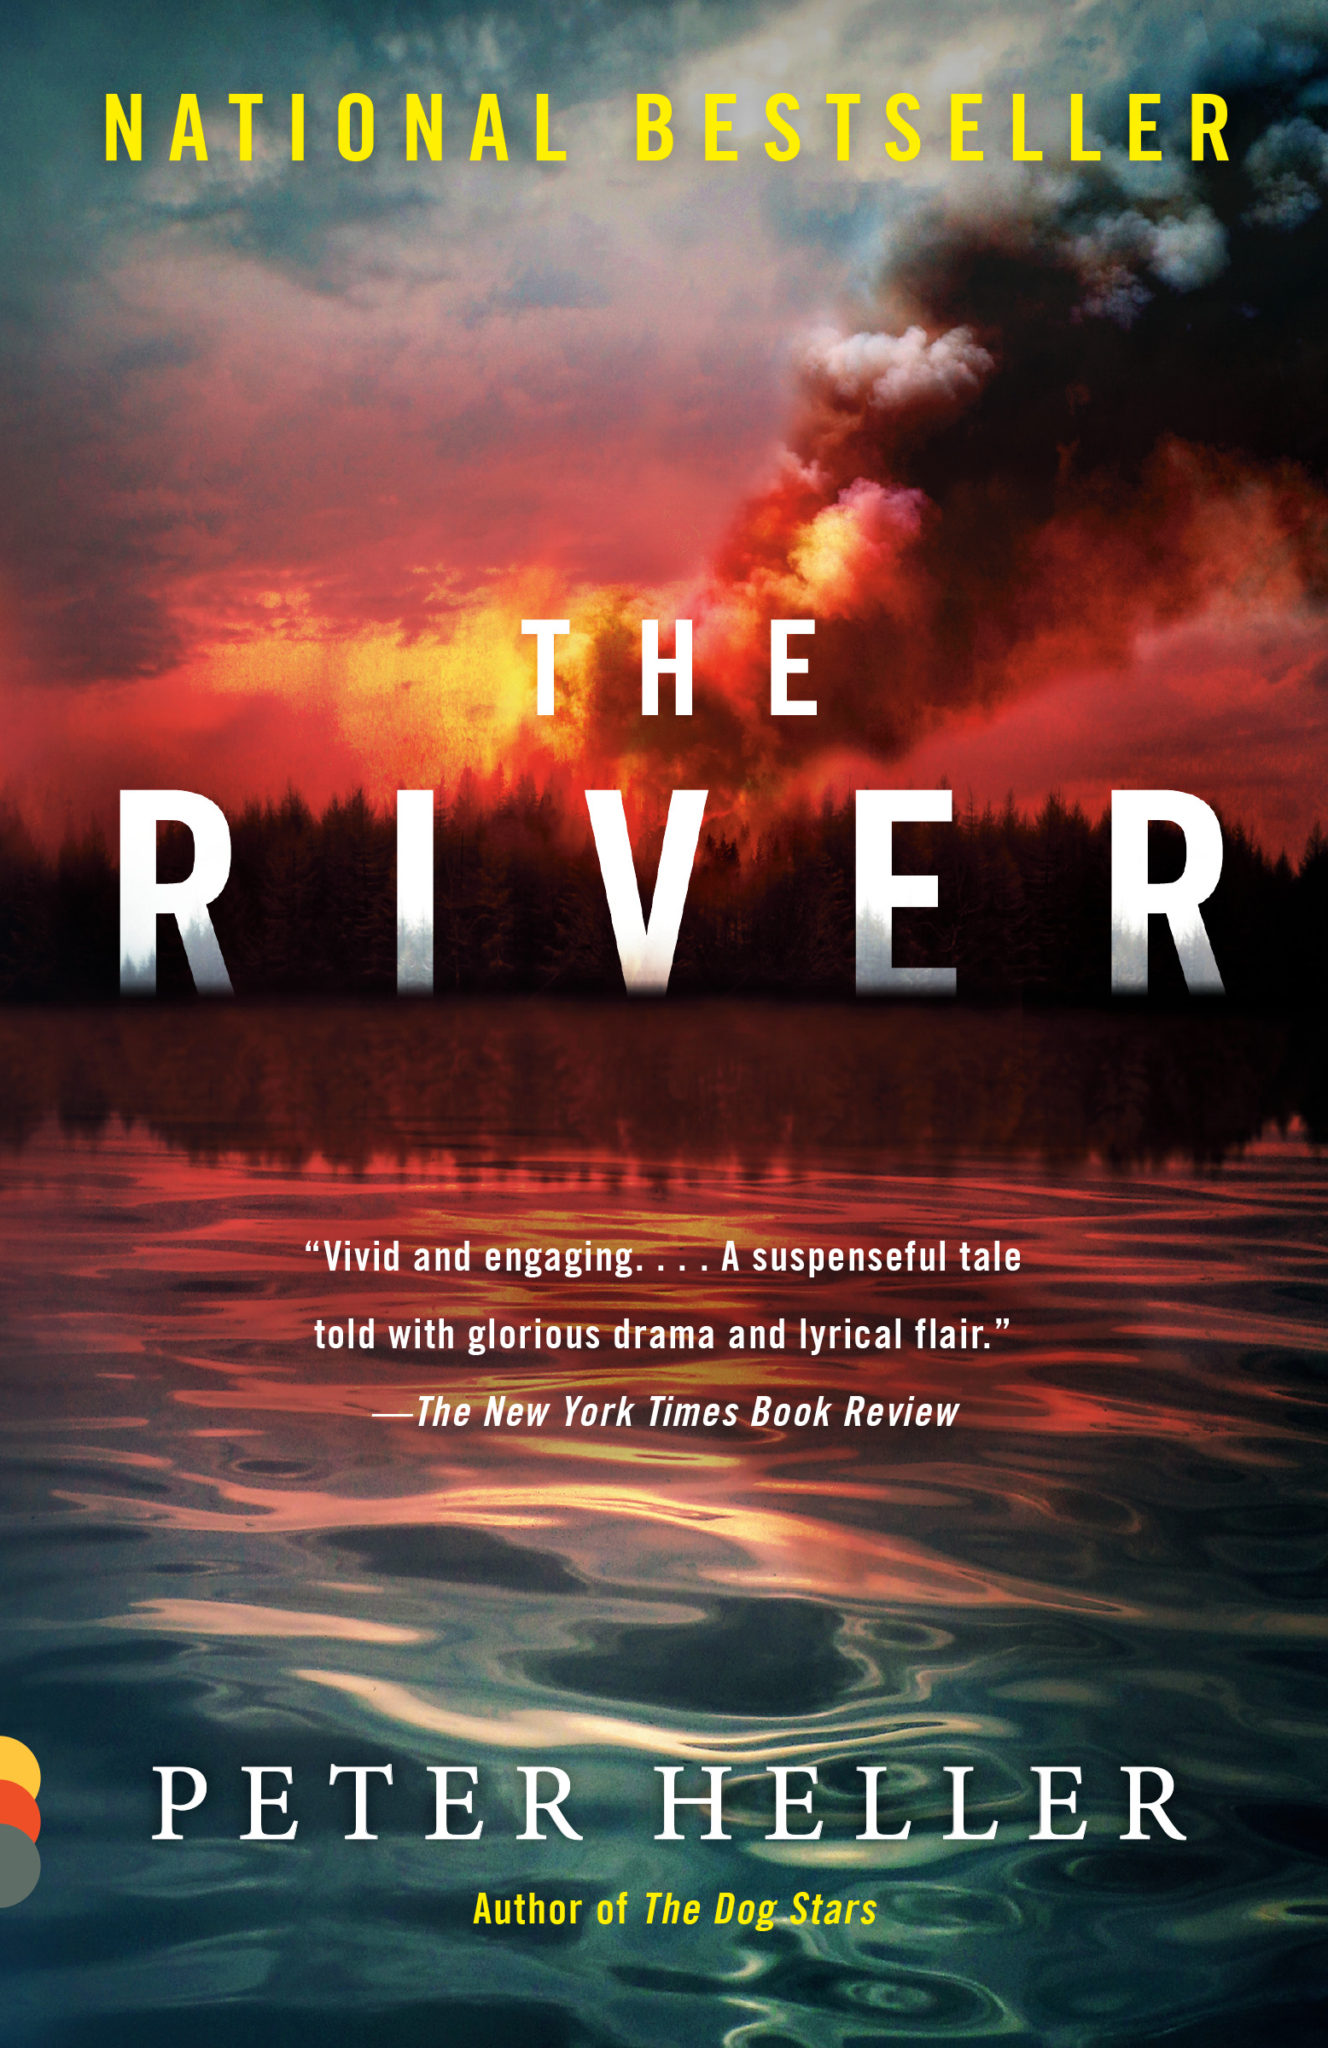 the river by peter heller summary